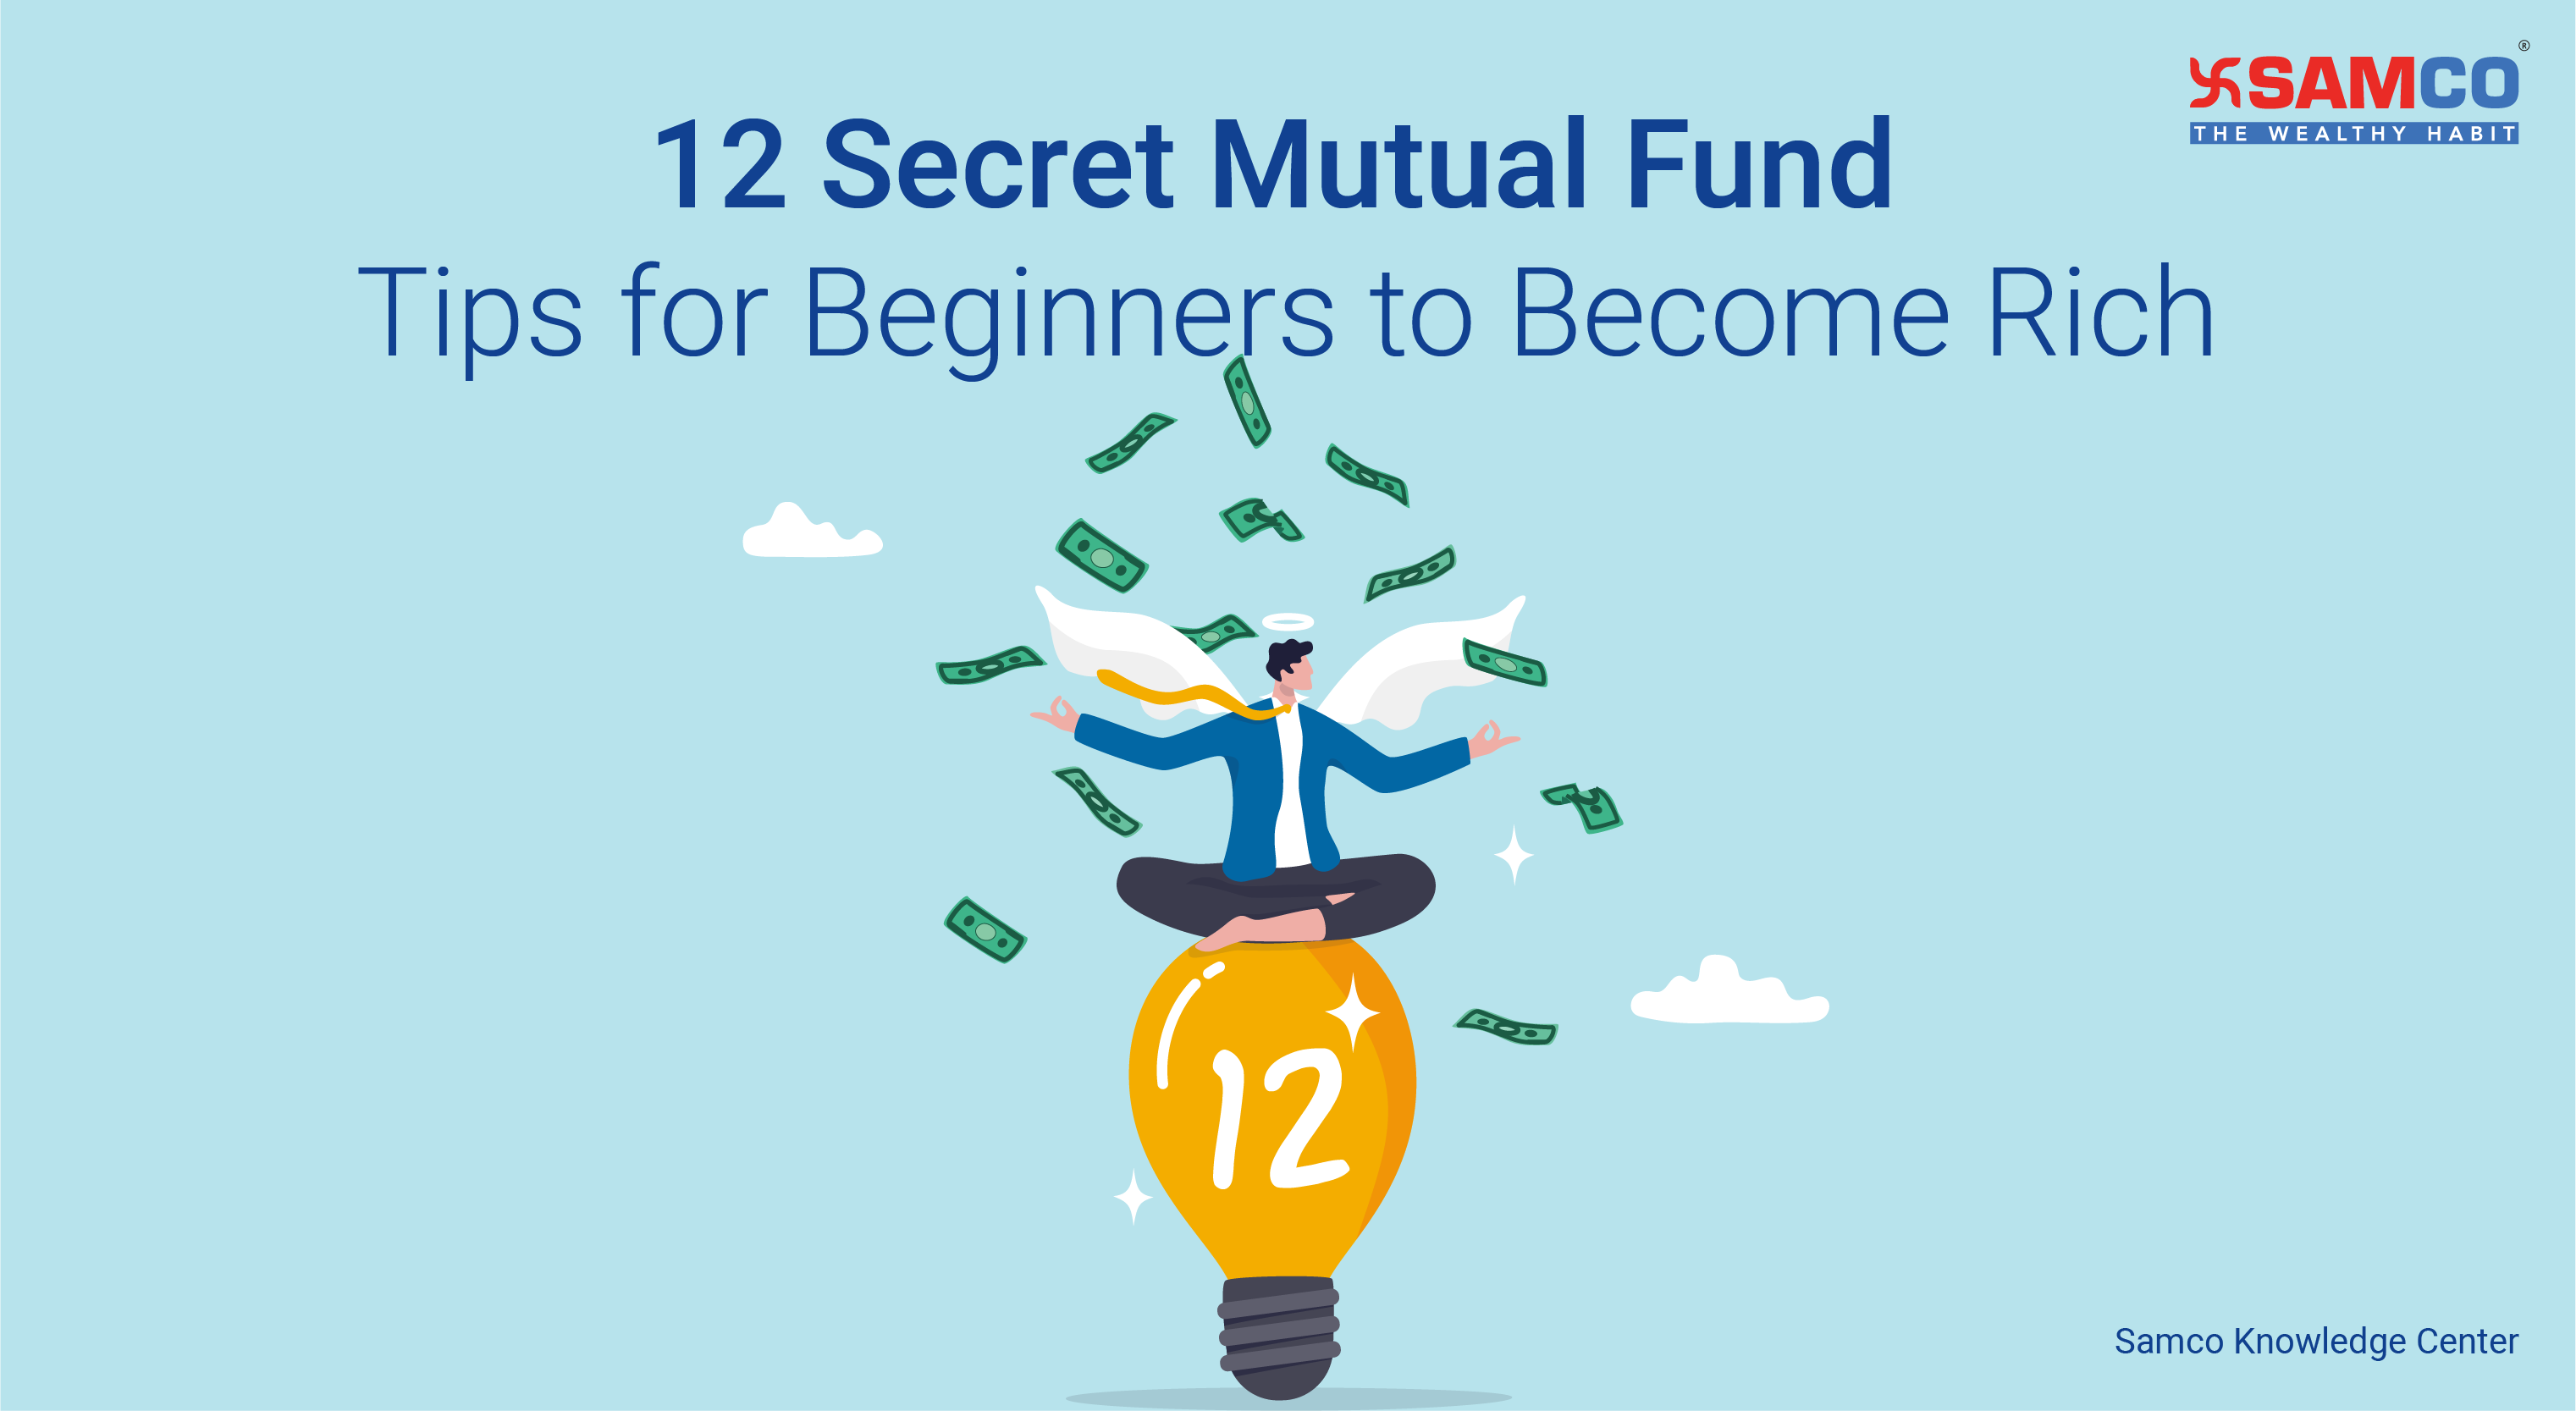 12 Secret Mutual Fund Tips for Beginners to Become Rich